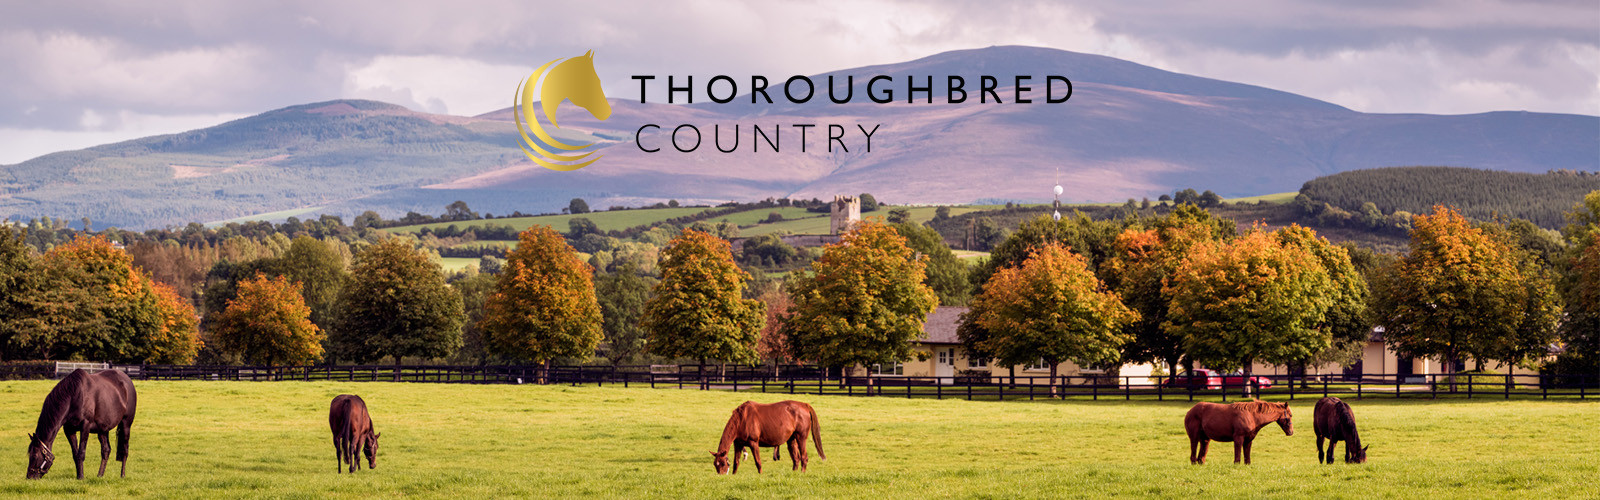 Thoroughbred country x different logo www.kclub.ie_v2